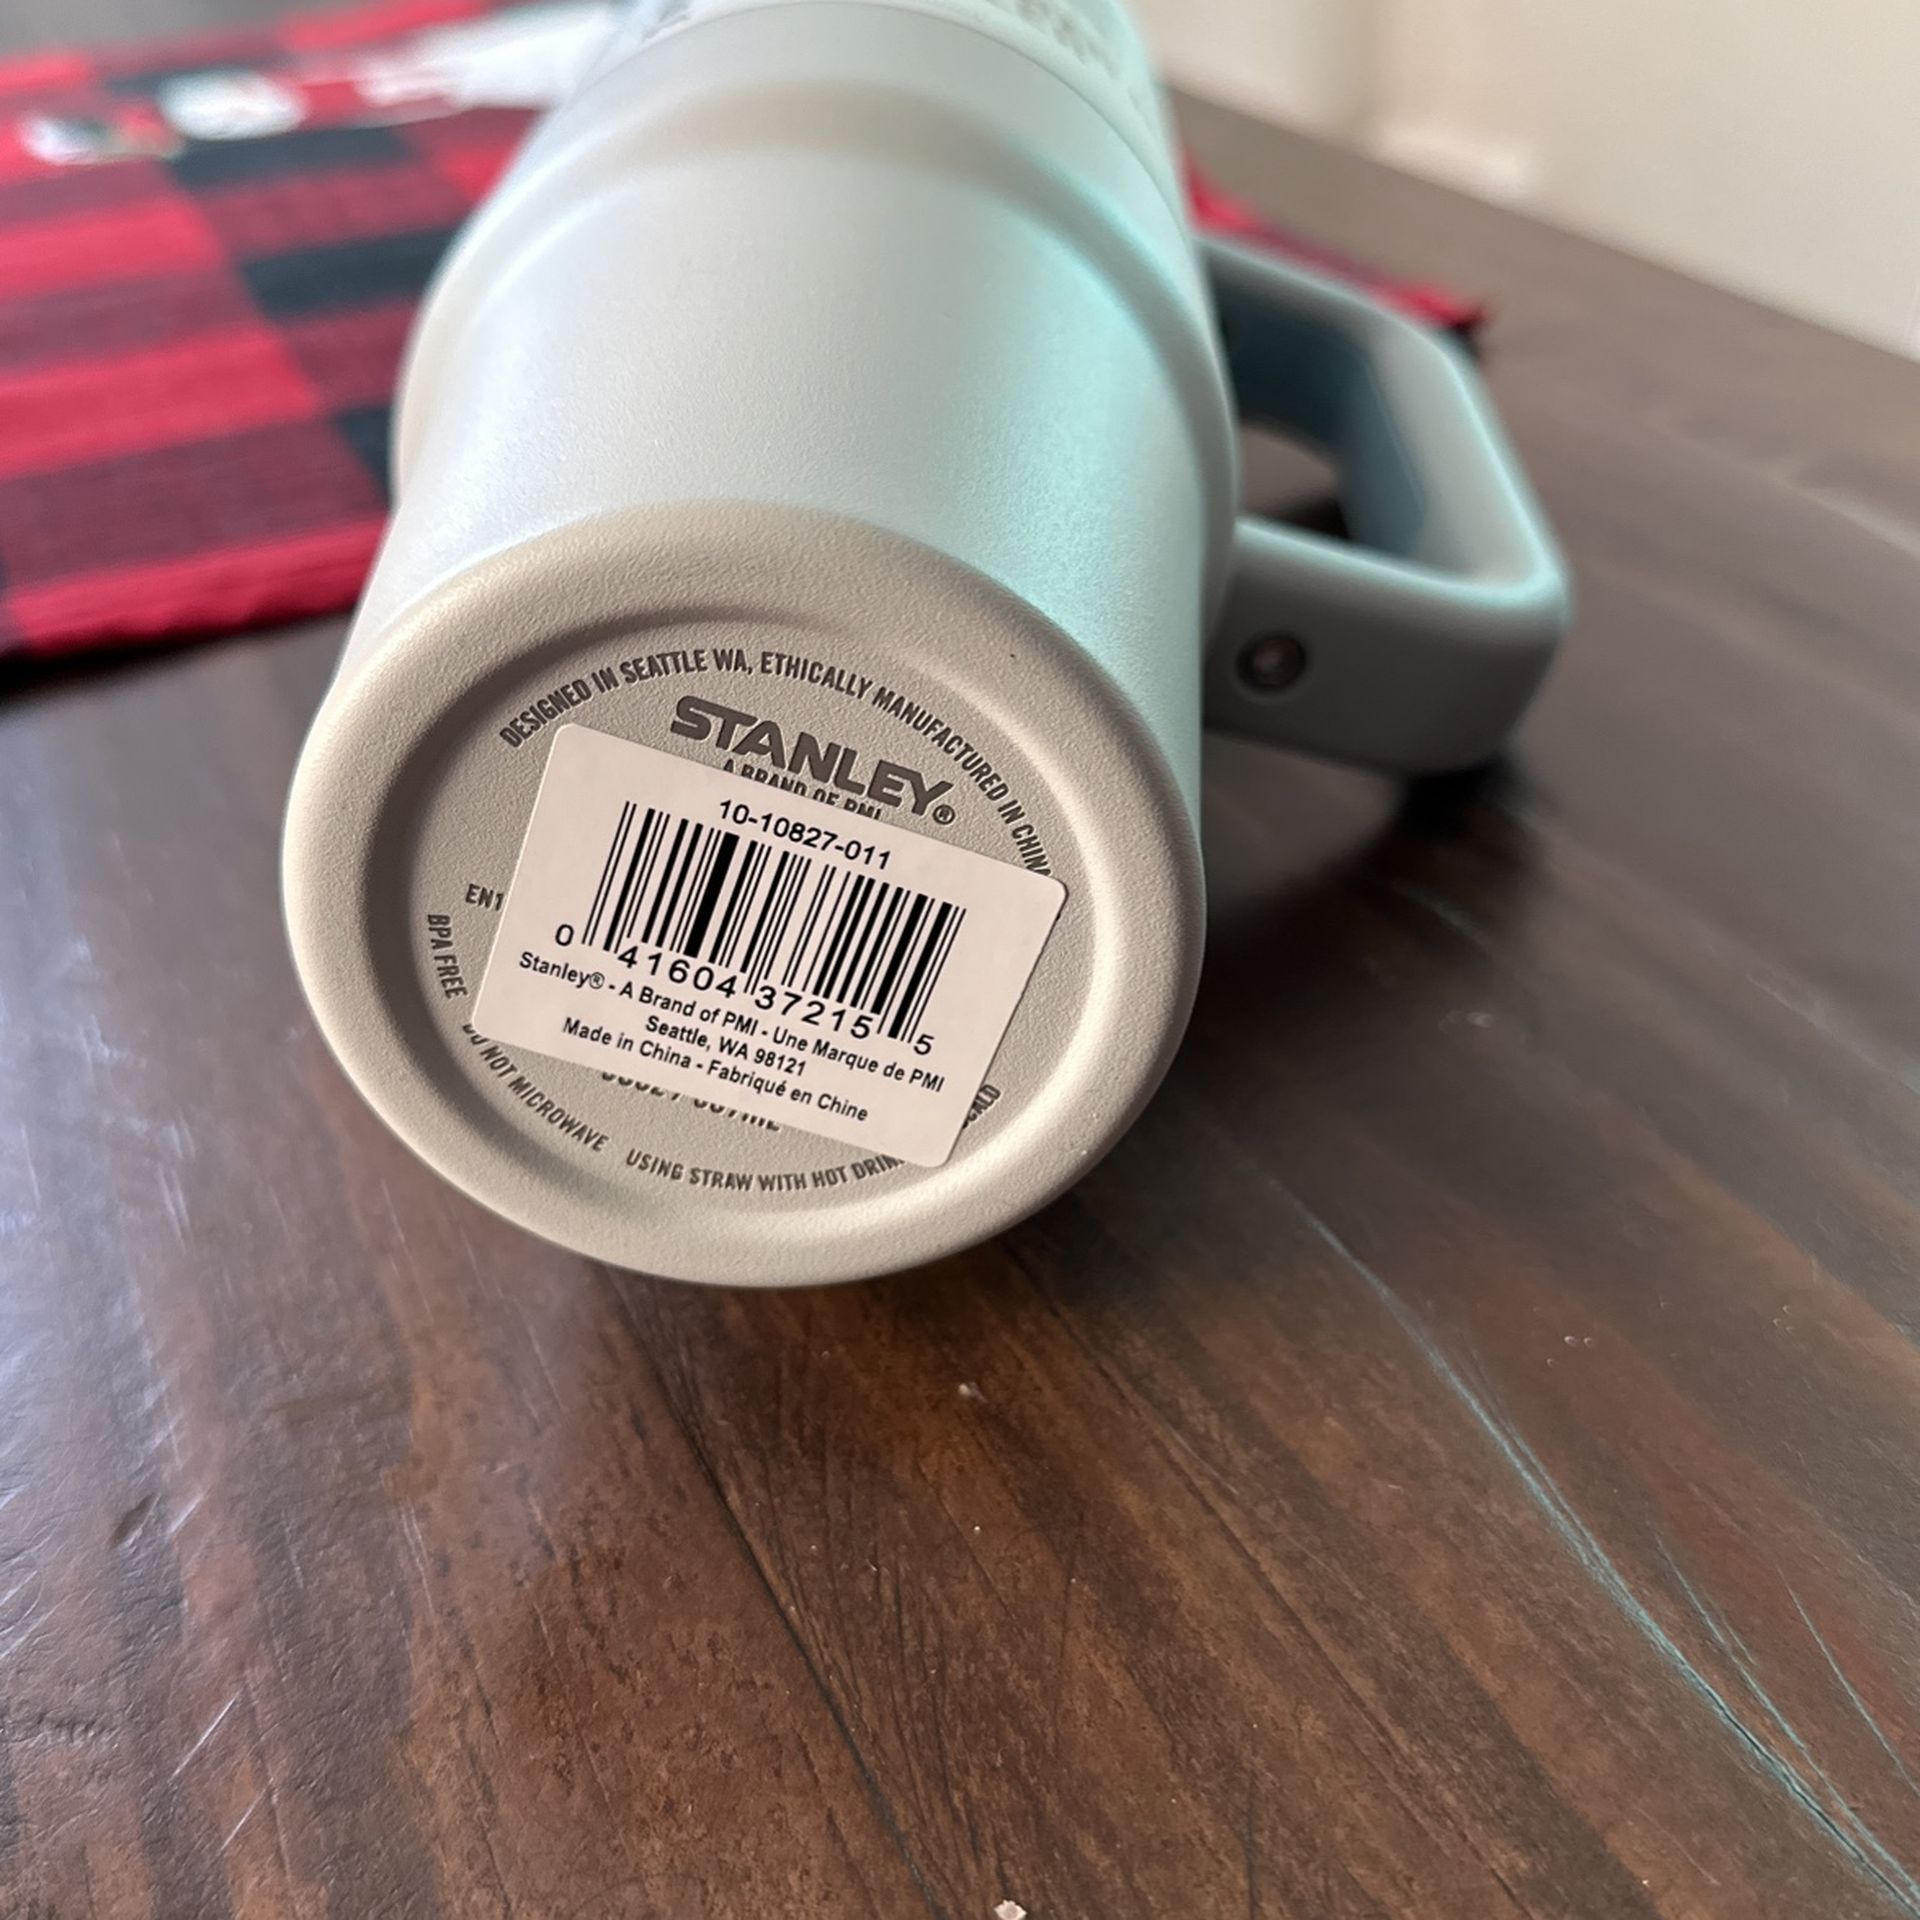 Stanley Flowstate Tumbler The Quencher H2.0 - 30 Oz - Eucalyptus Color for  Sale in Long Beach, CA - OfferUp